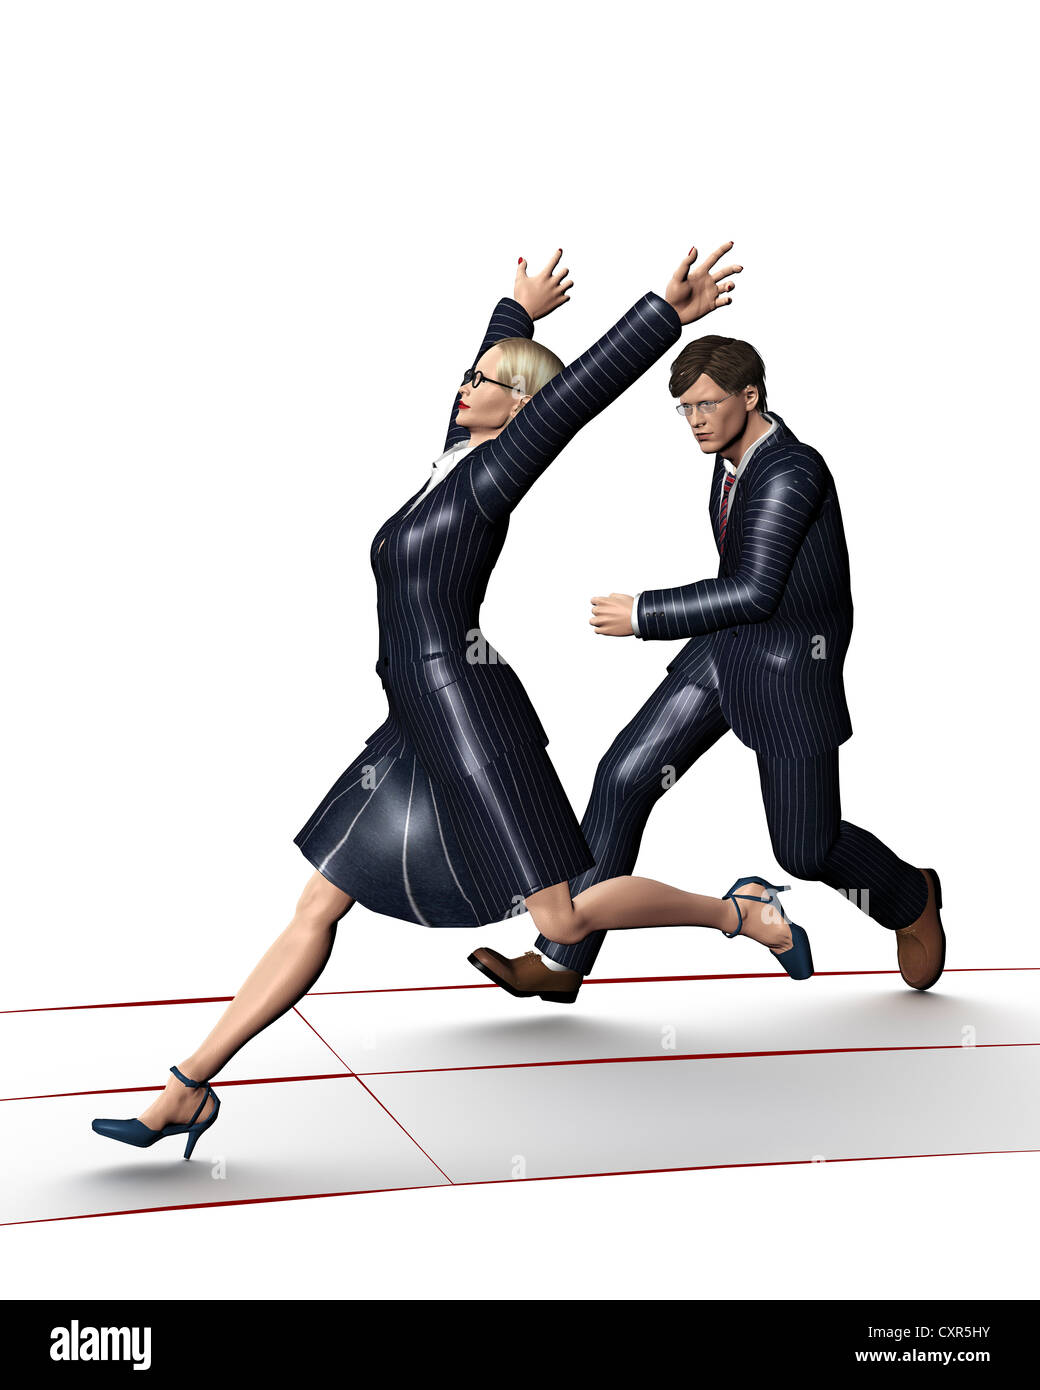 Foot race, woman crossing the finishing line before the man, symbolic image female quota, career, illustration Stock Photo